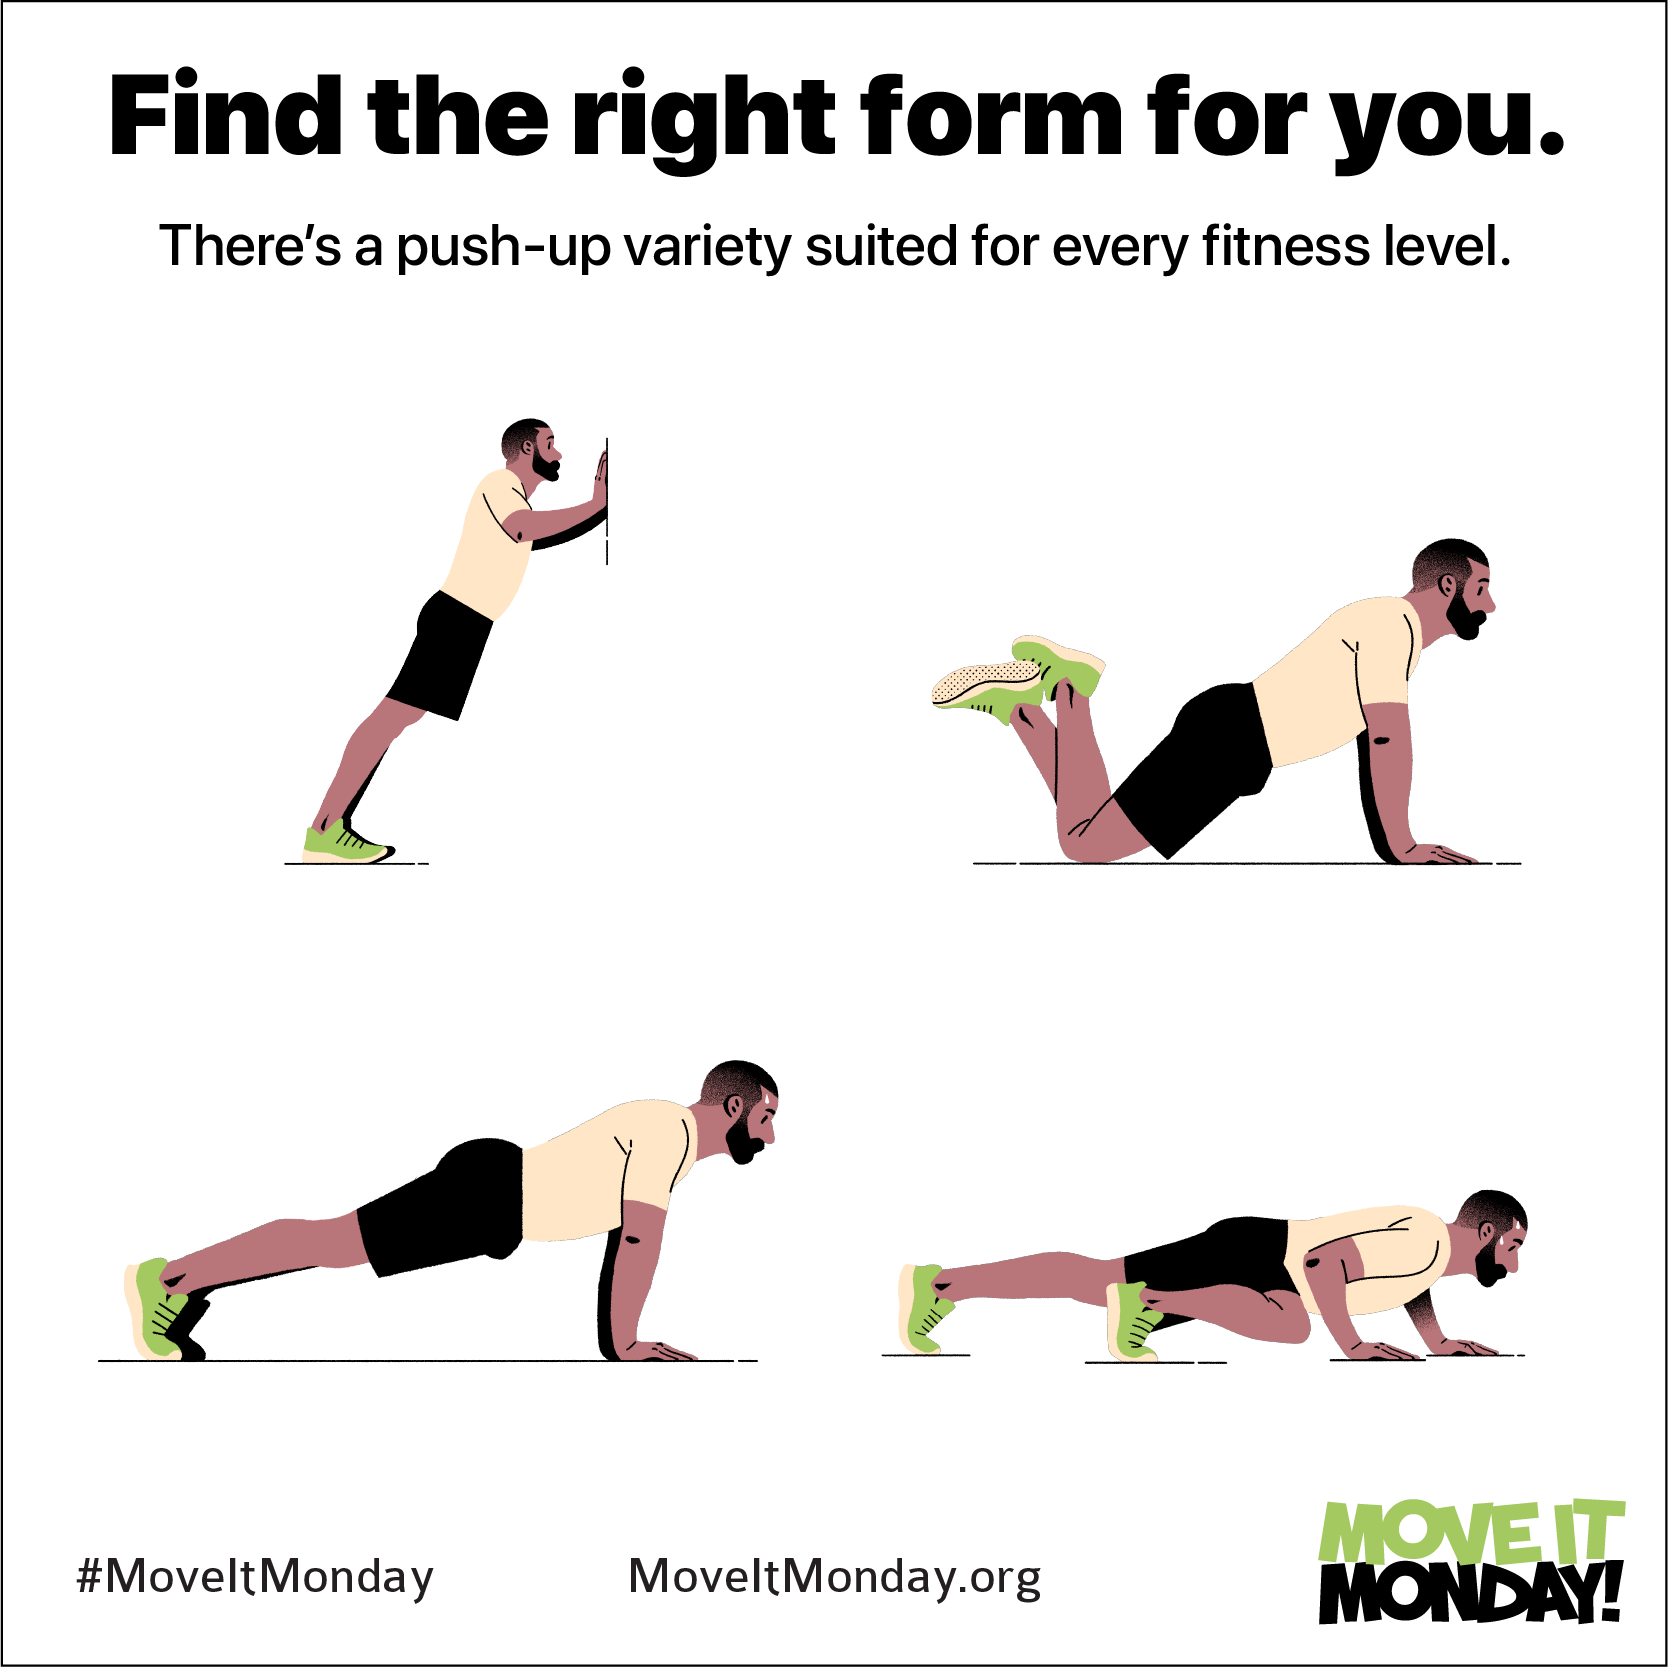 https://www.mondaycampaigns.org/wp-content/uploads/2020/08/move-it-monday-graphic-progression-of-a-push-up.png